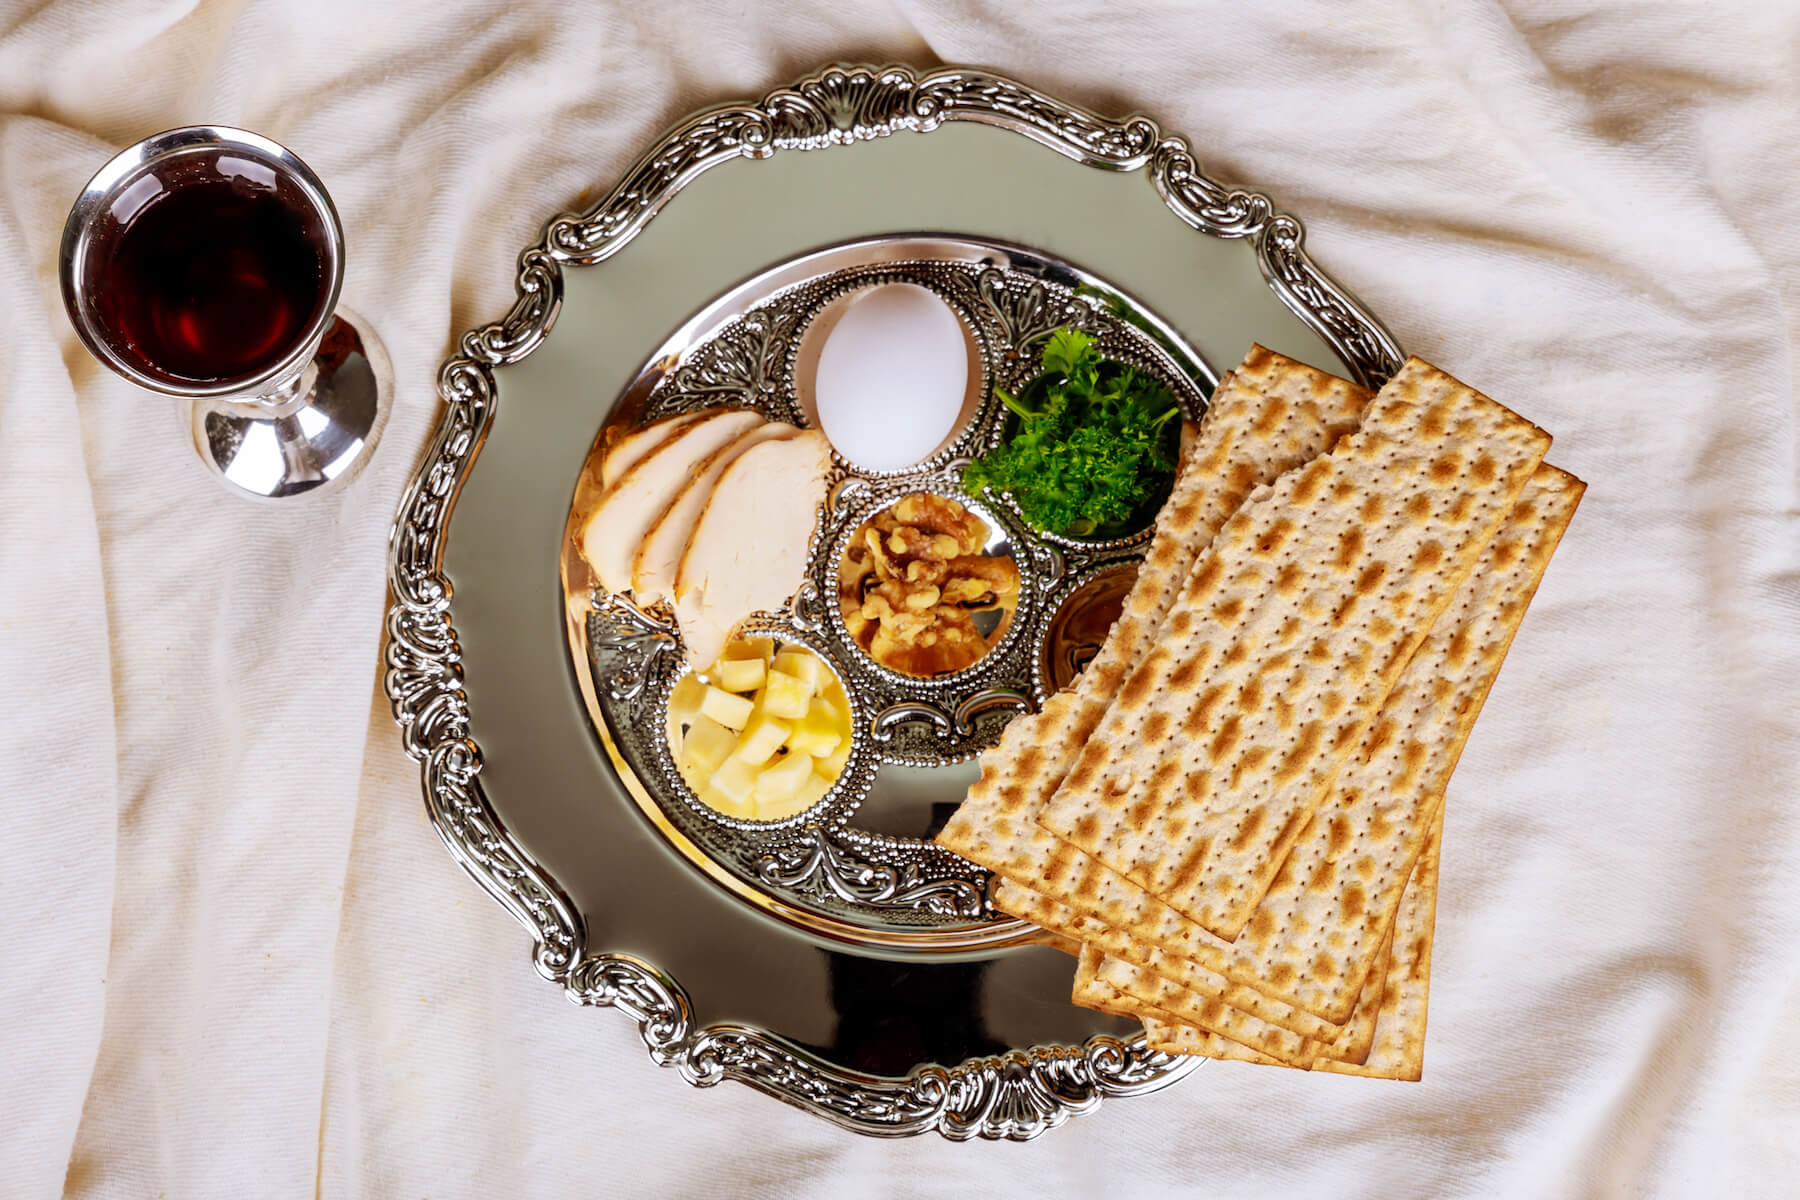 As I shelter in place during Covid-19, my seder plate will be non-traditional